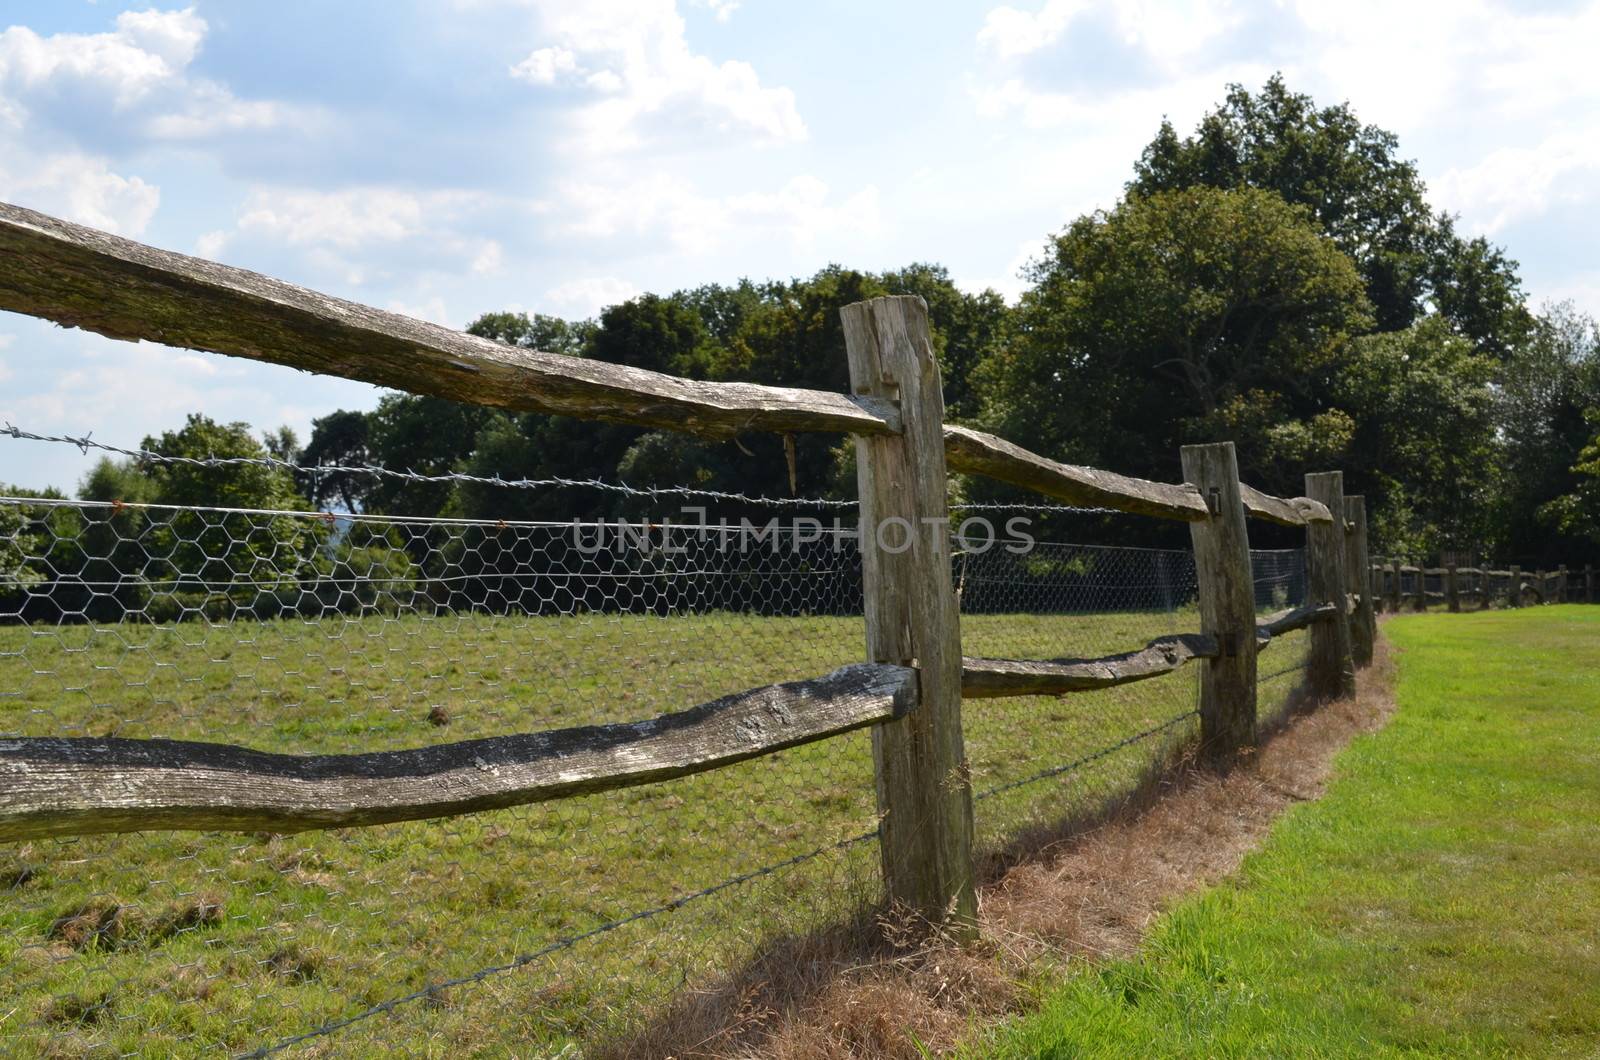 Rustic wooden fencing surrounding a English pasture field.